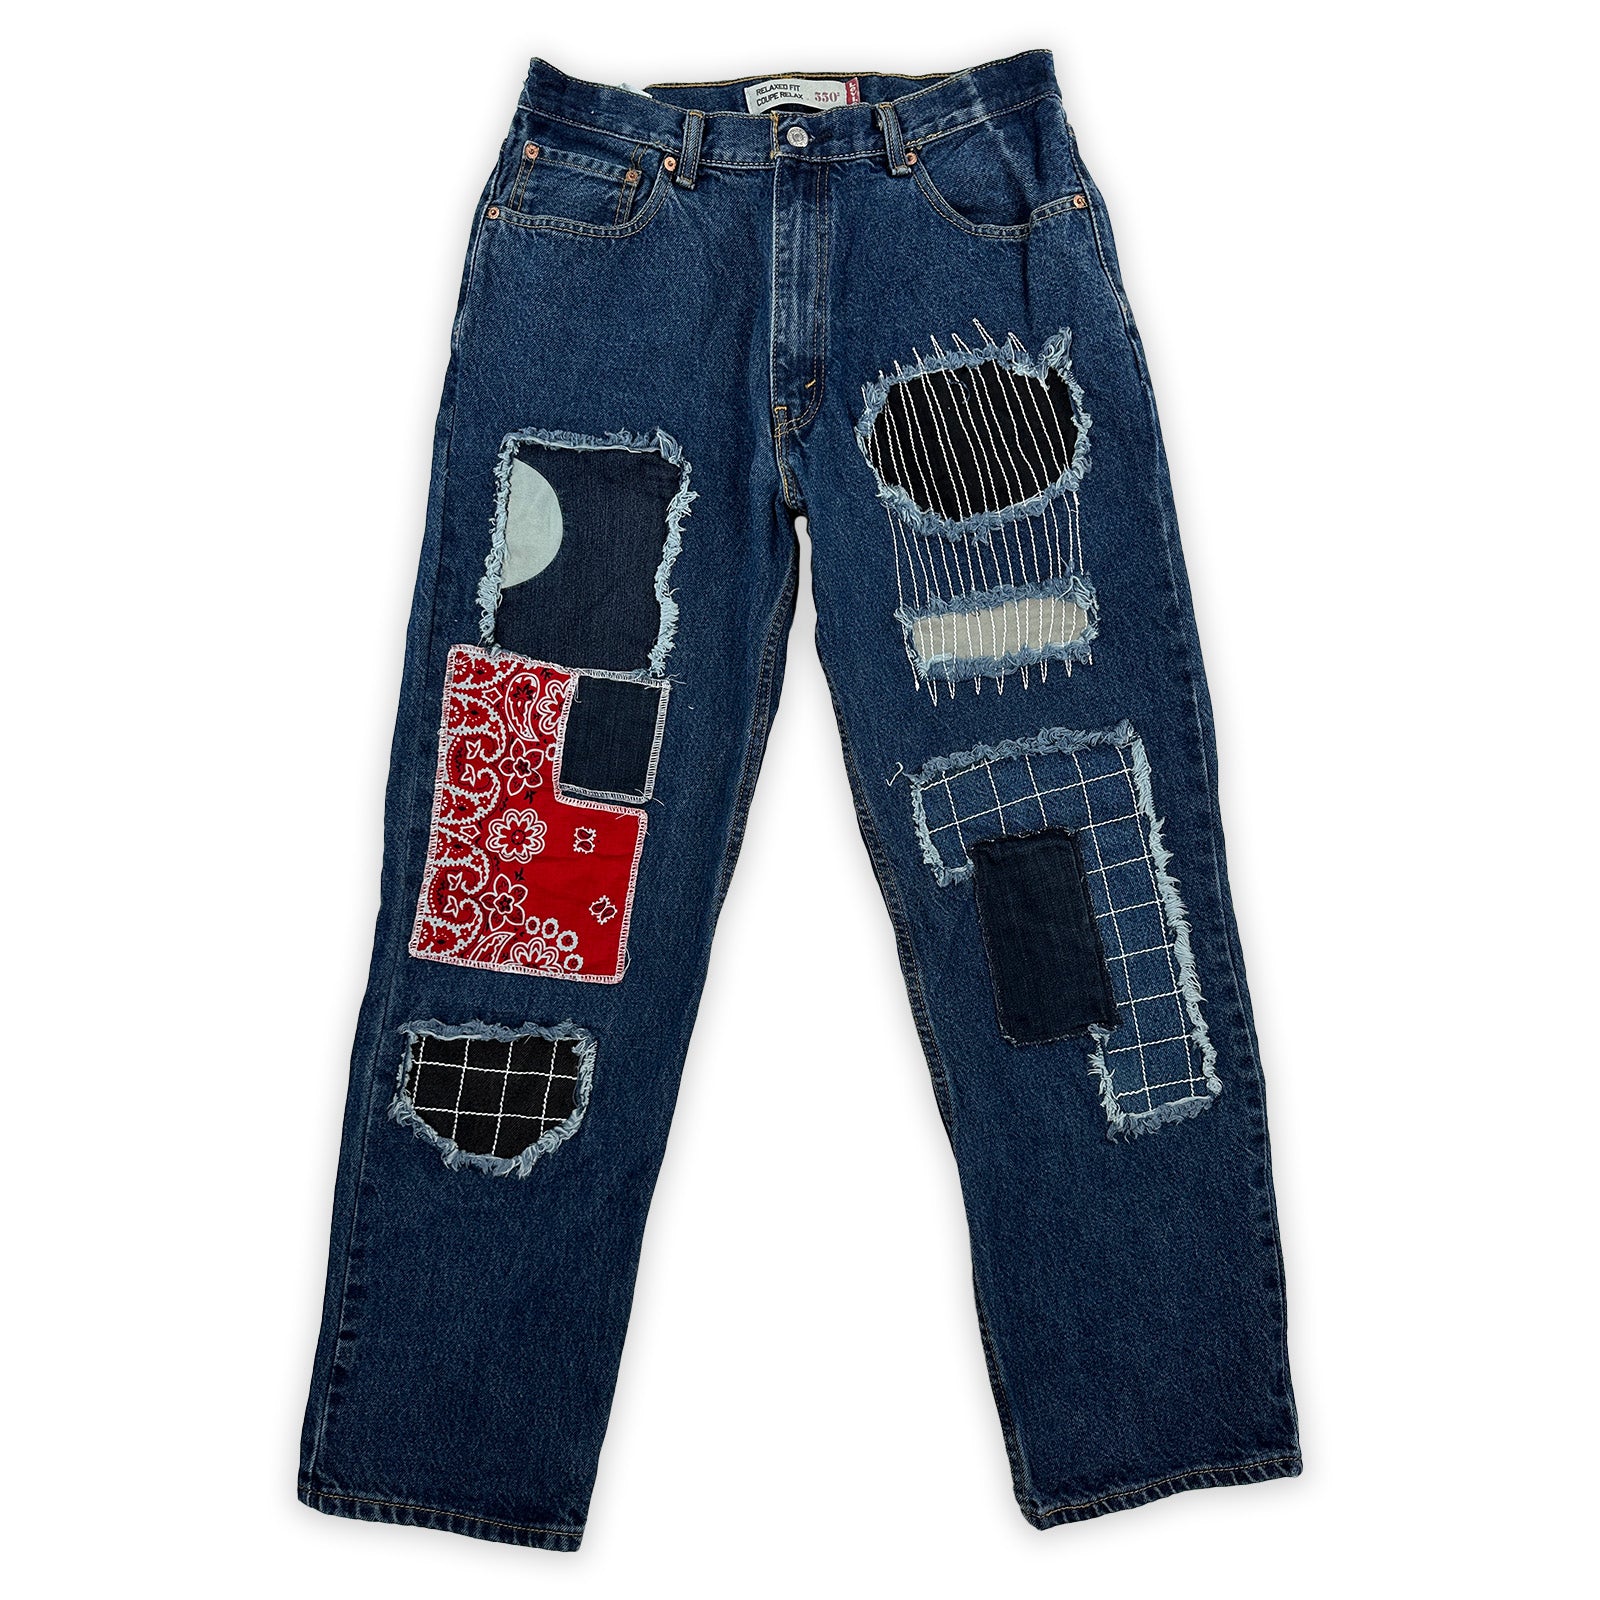 Bandana Patched Reclaimed Levi's 550 Relaxed Fit - 33x31 Great Lakes Reclaimed Denim